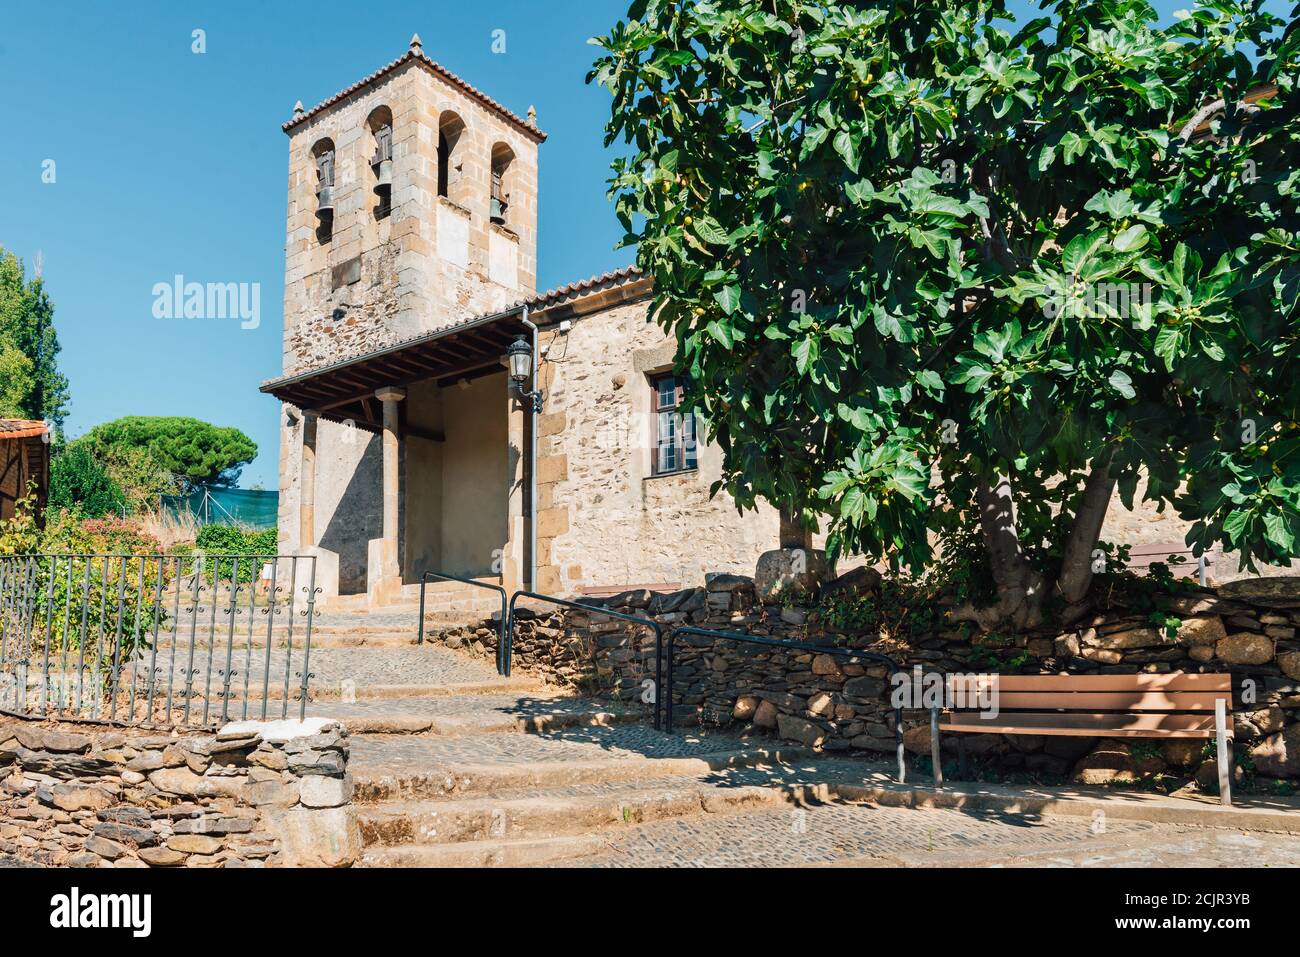 Our Lady of the Assumption Parish in Sotoserrano, spain. Stock Photo